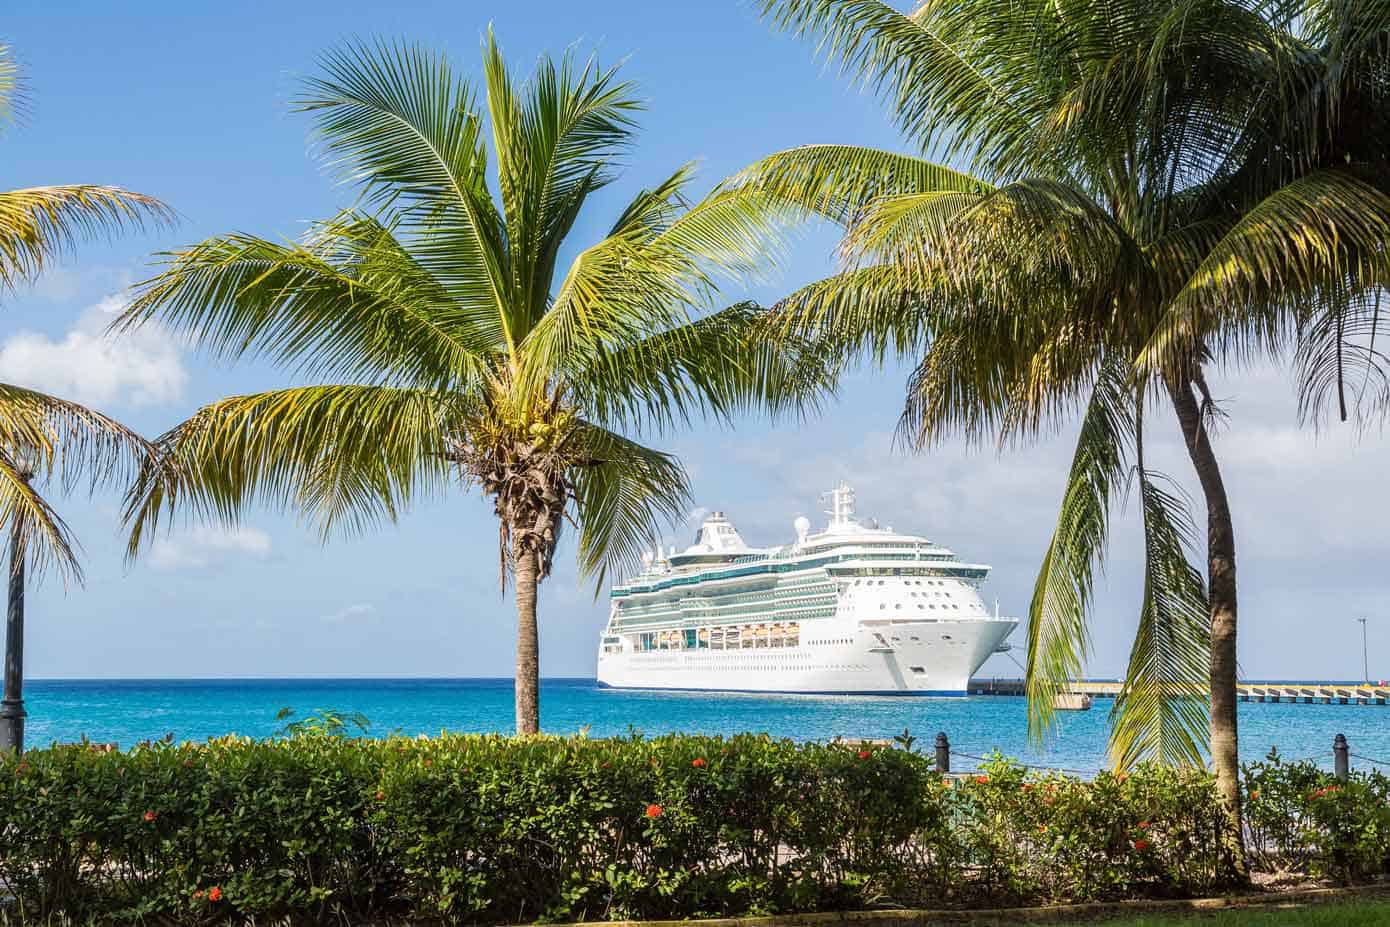 A cruise ship is docked off shore behind palm trees in a tropical place.